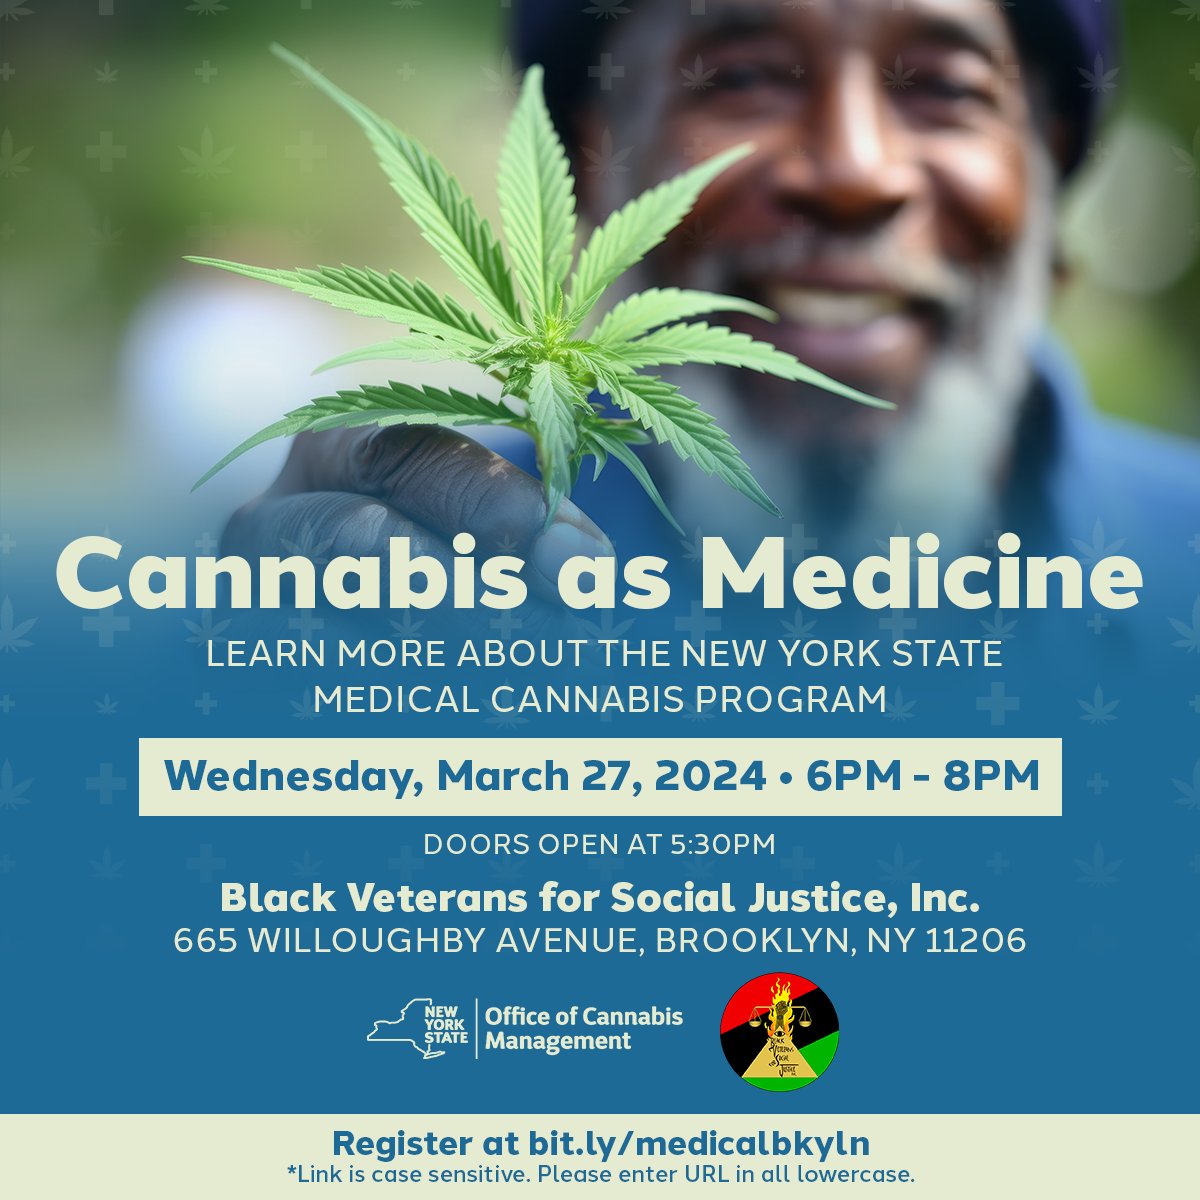 🚨 REMINDER: Your journey with medical #NYcannabis comes with personalized care, diverse product options, and ongoing professional support. 🗓️ Join us on tomorrow in Brooklyn to learn more about the NYS Medical Cannabis Program. To register for event: bit.ly/medicalbklyn